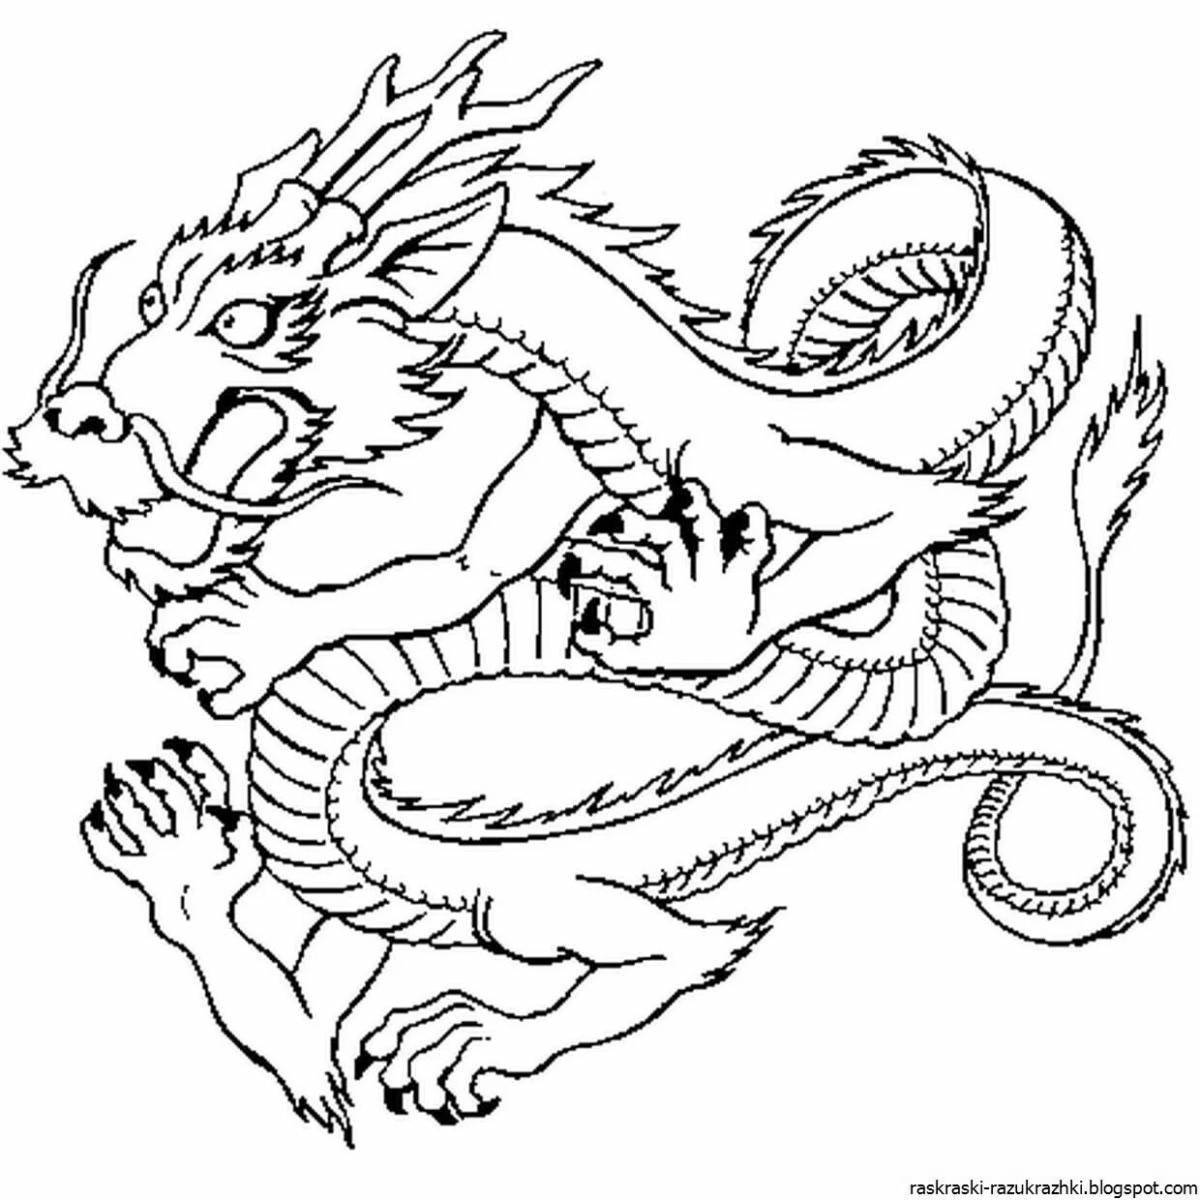 Brilliant chinese dragon coloring book